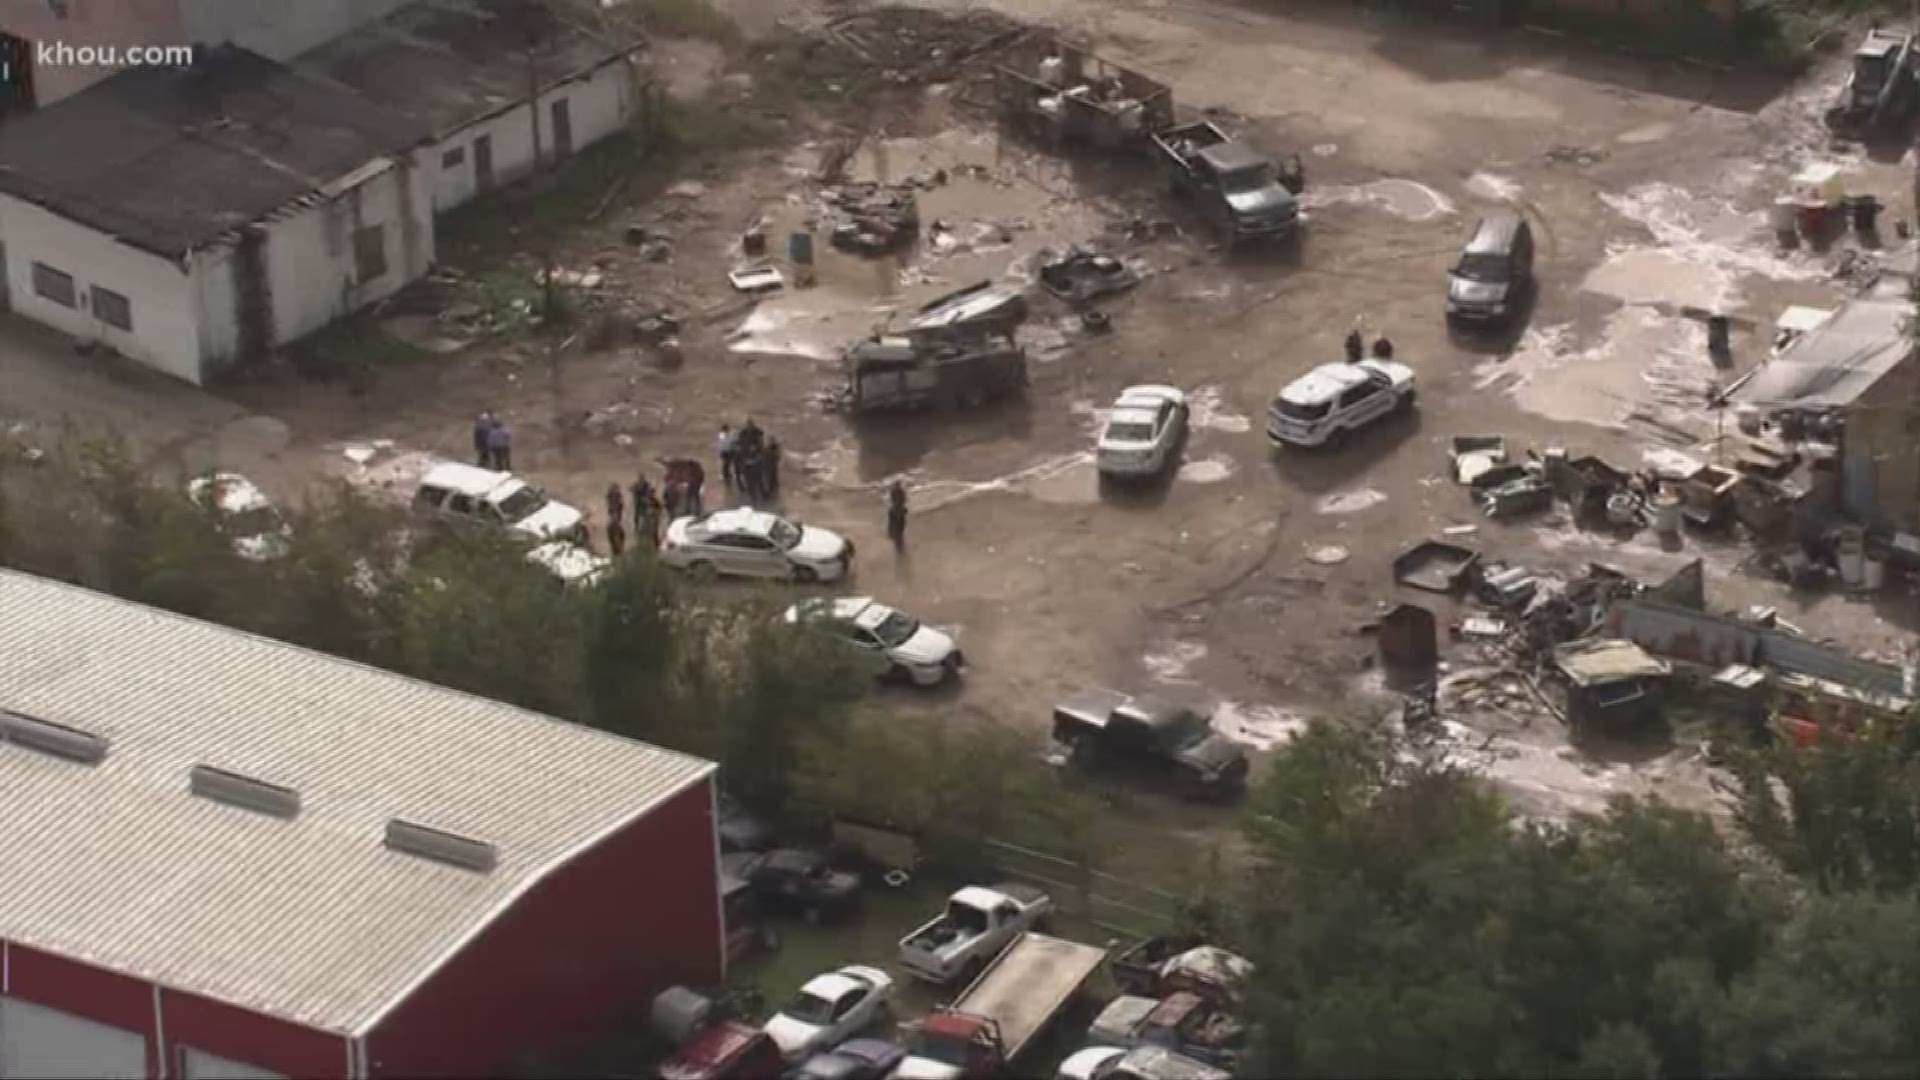 The Harris County Sheriff's Office says a man is dead and another person has been detained following a shooting at a scrap yard on the Eastex Freeway.